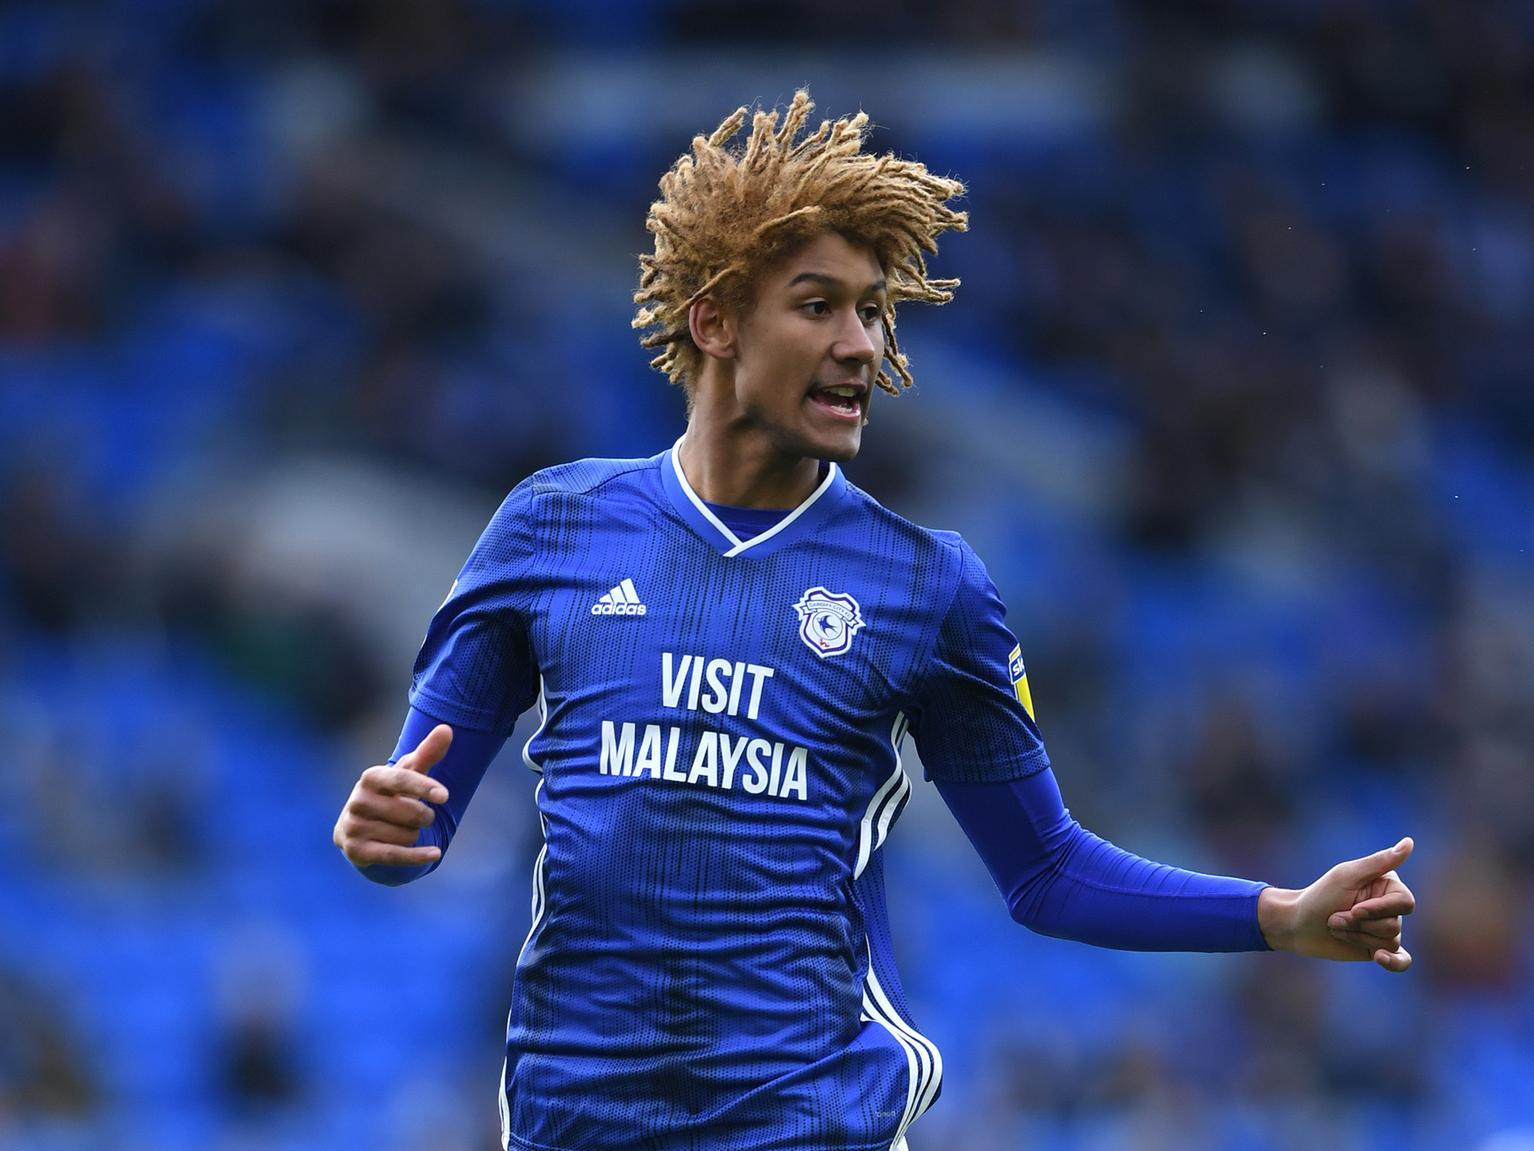 Cardiff City's loan star Dion Sanderson has been linked with a host of Premier League sides. The Wolves star's versatility is said to be of particular interest to top tier teams. (Daily Mail)